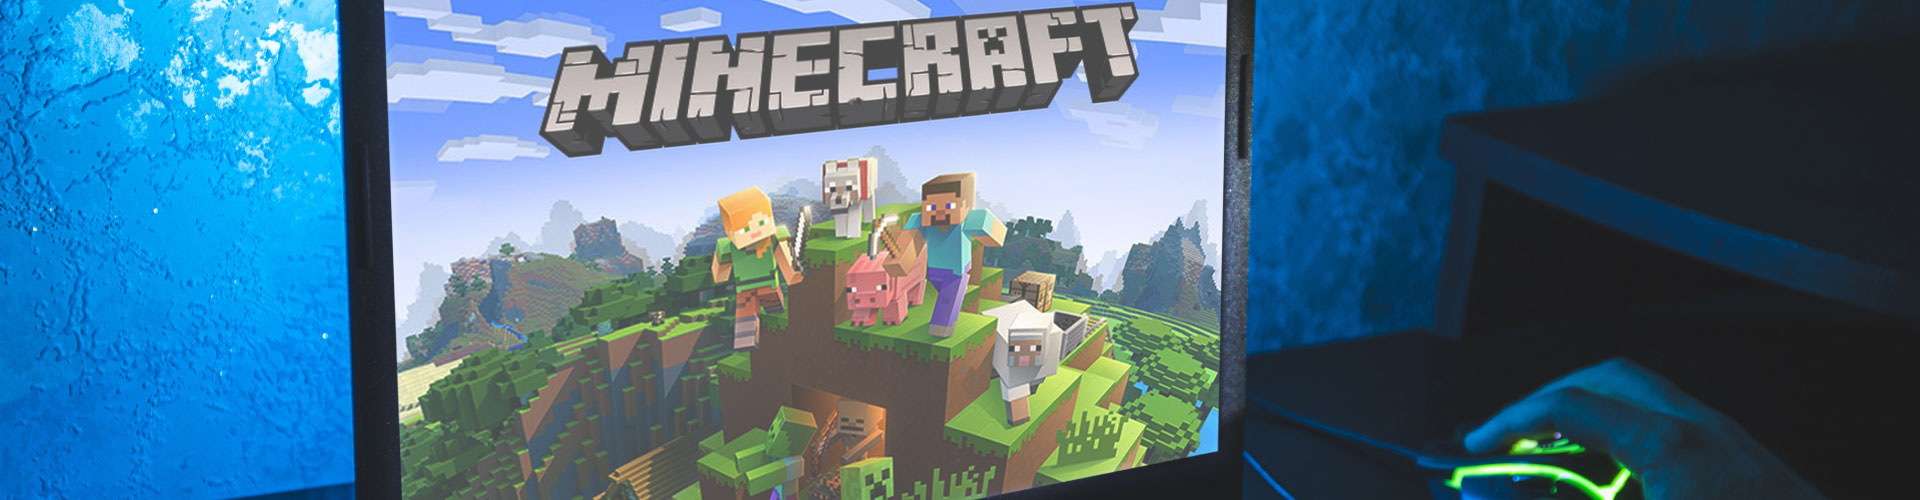 Minecraft Coding For Kids: All You Need to Know